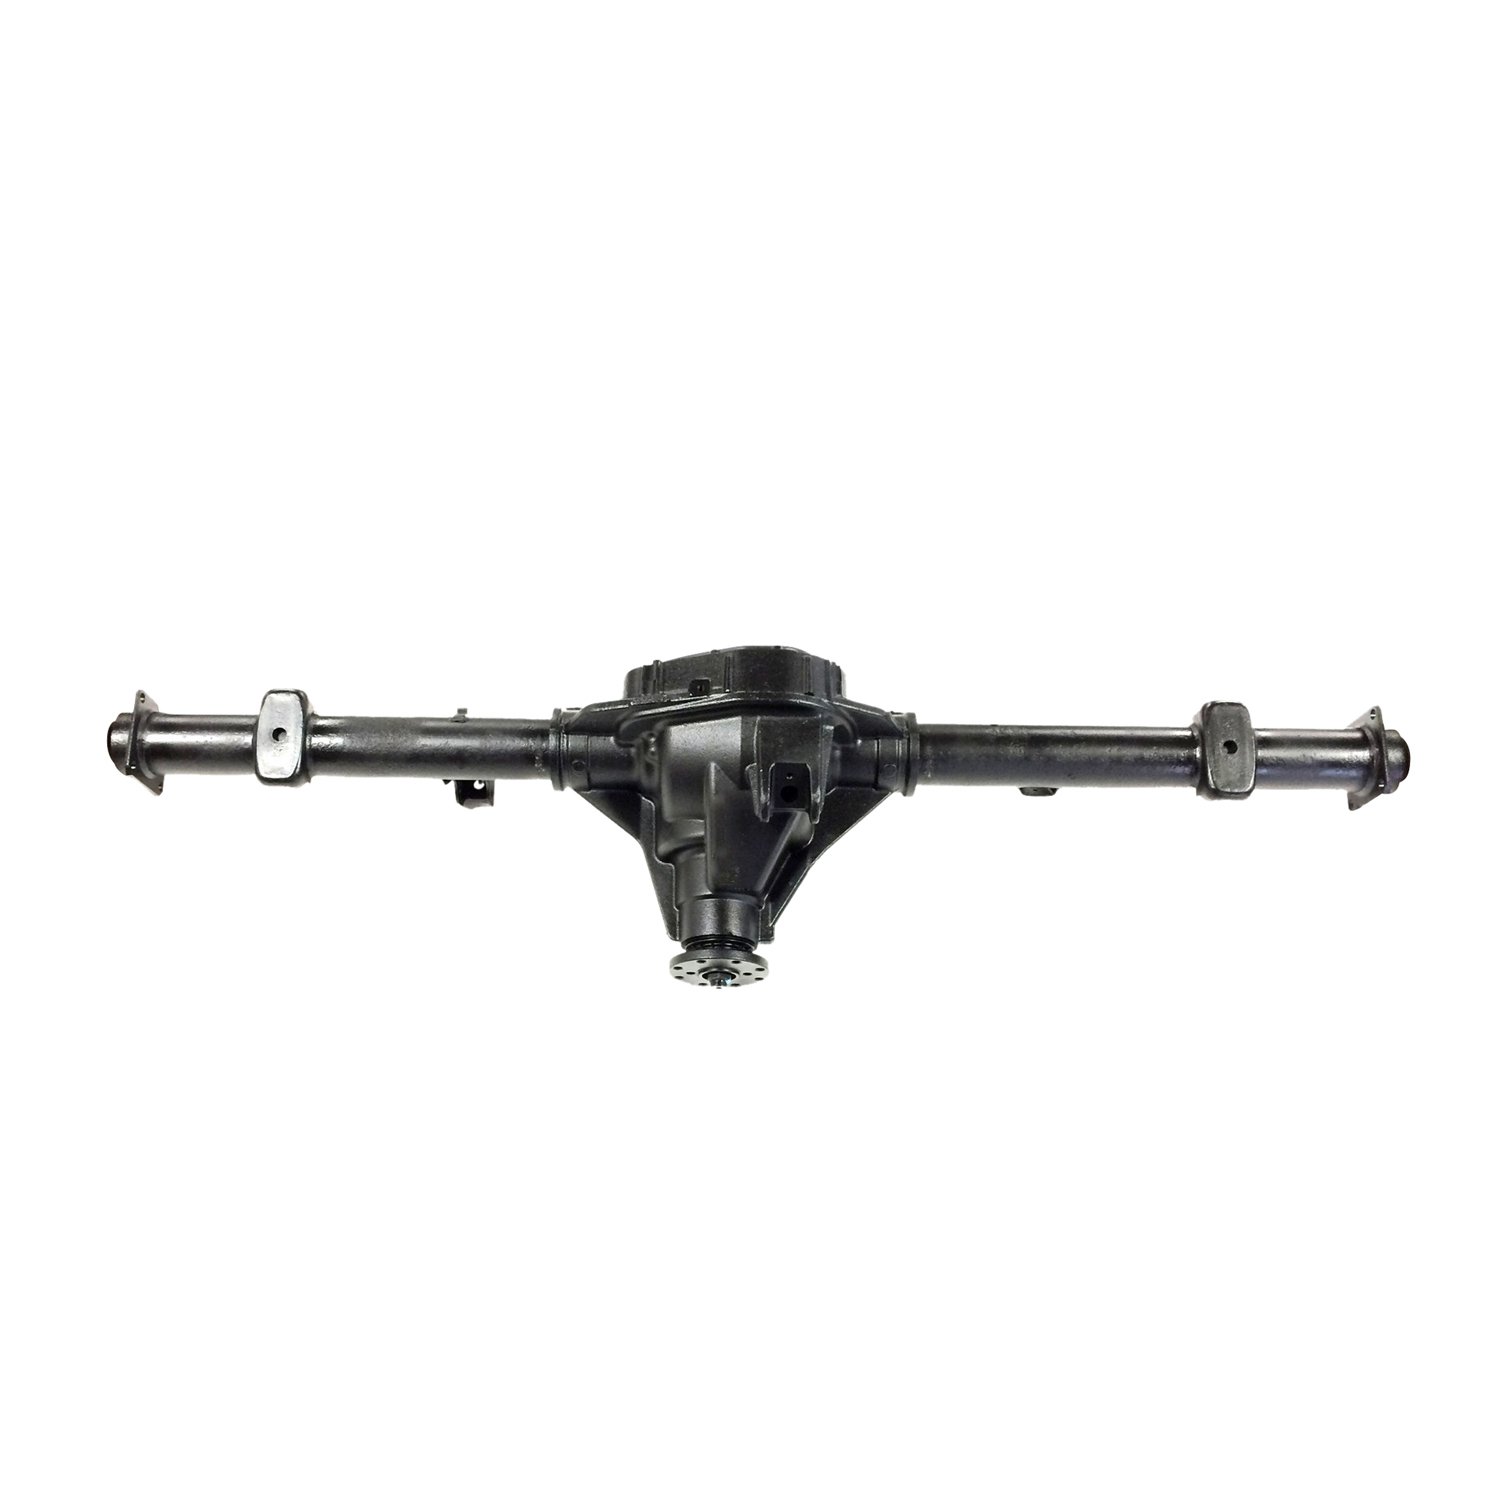 Remanufactured Axle Assy for 9.75" 99-00 F150 3.73 , Rear Drum, Posi LSD *Check Tag*